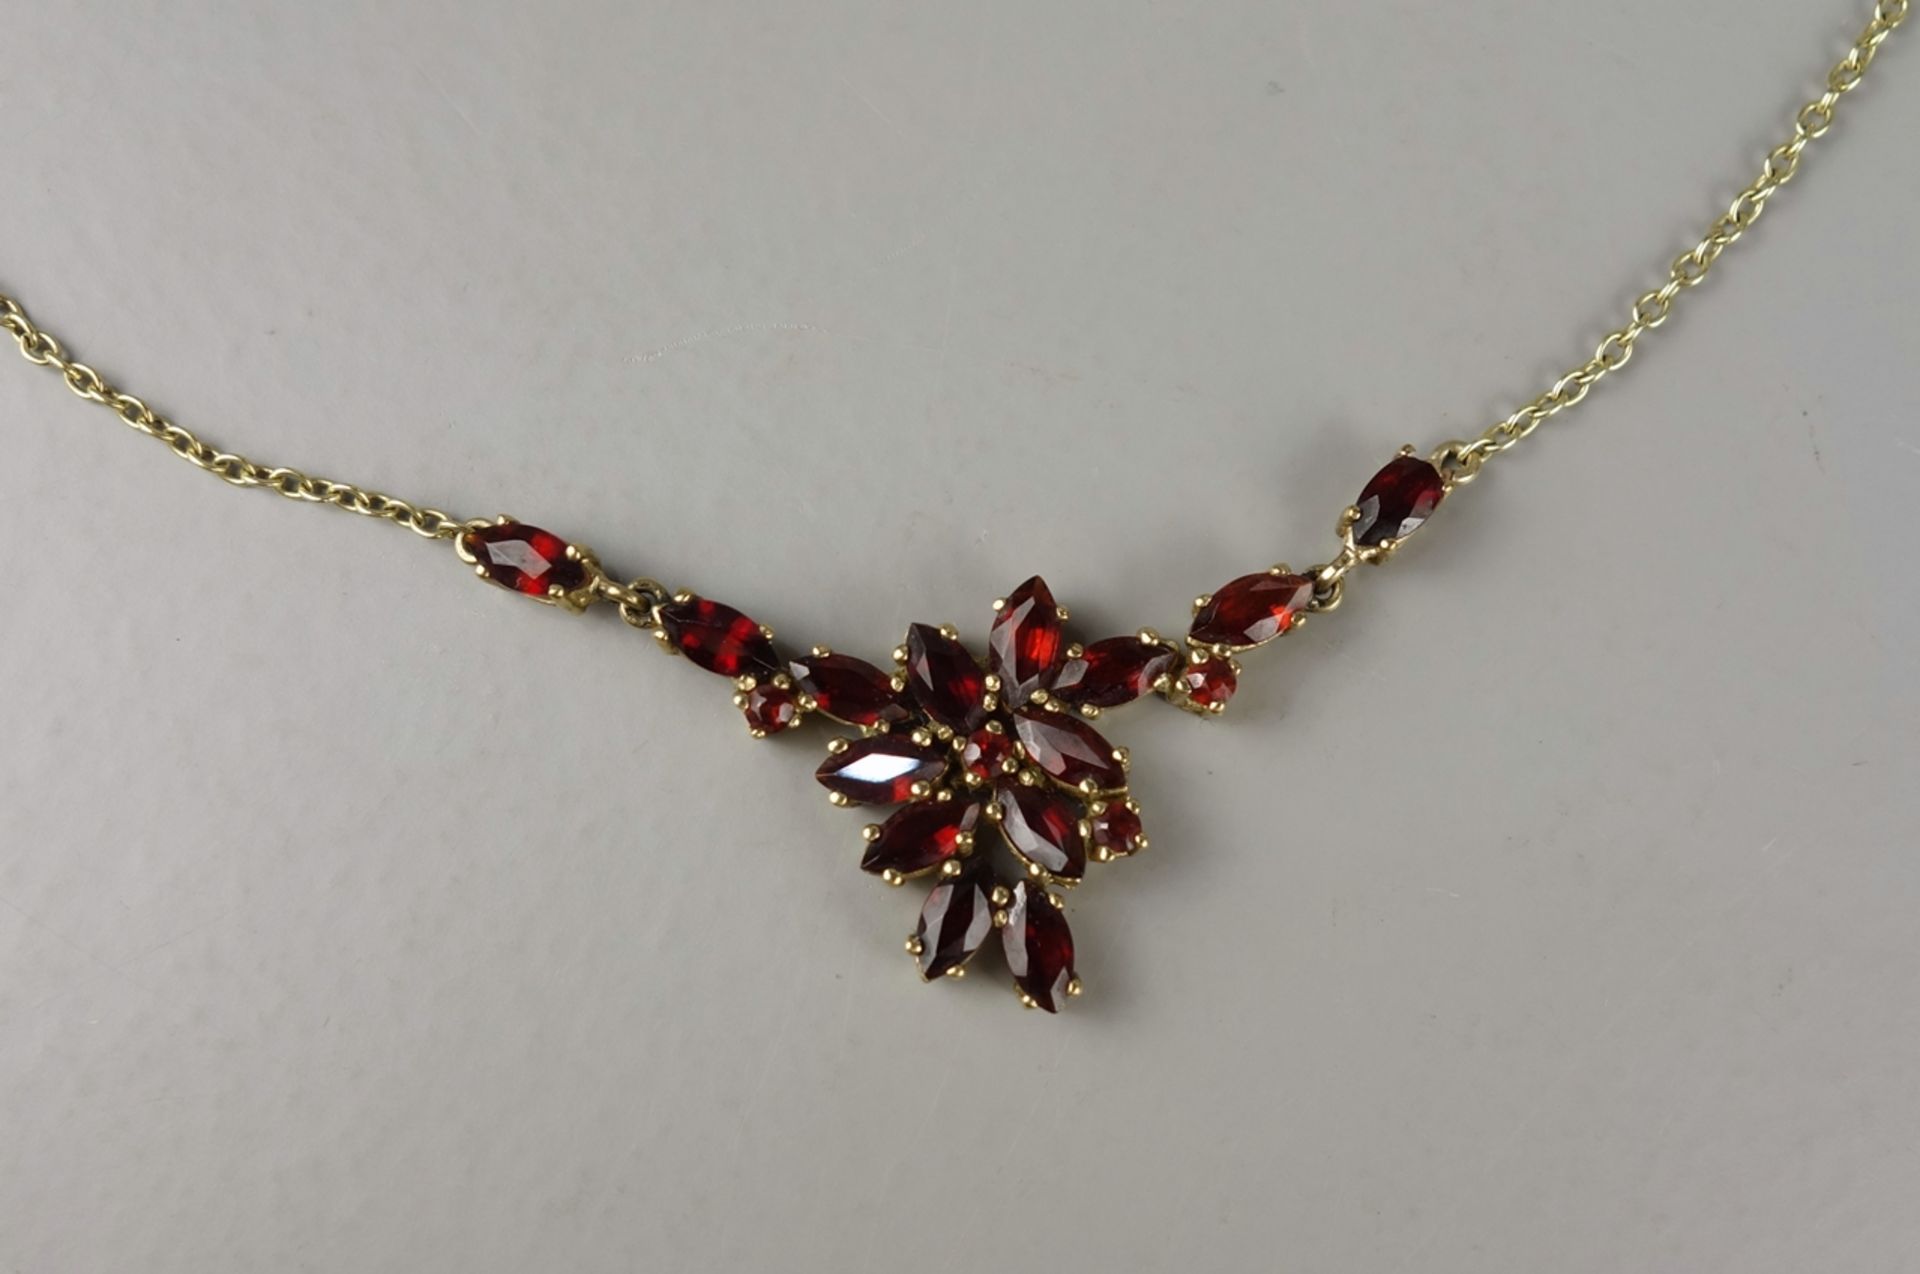 Garnet necklace, 8K gold, weight 5,88g, flower shaped middle part, anchor chain, l.approx.43cm - Image 3 of 3